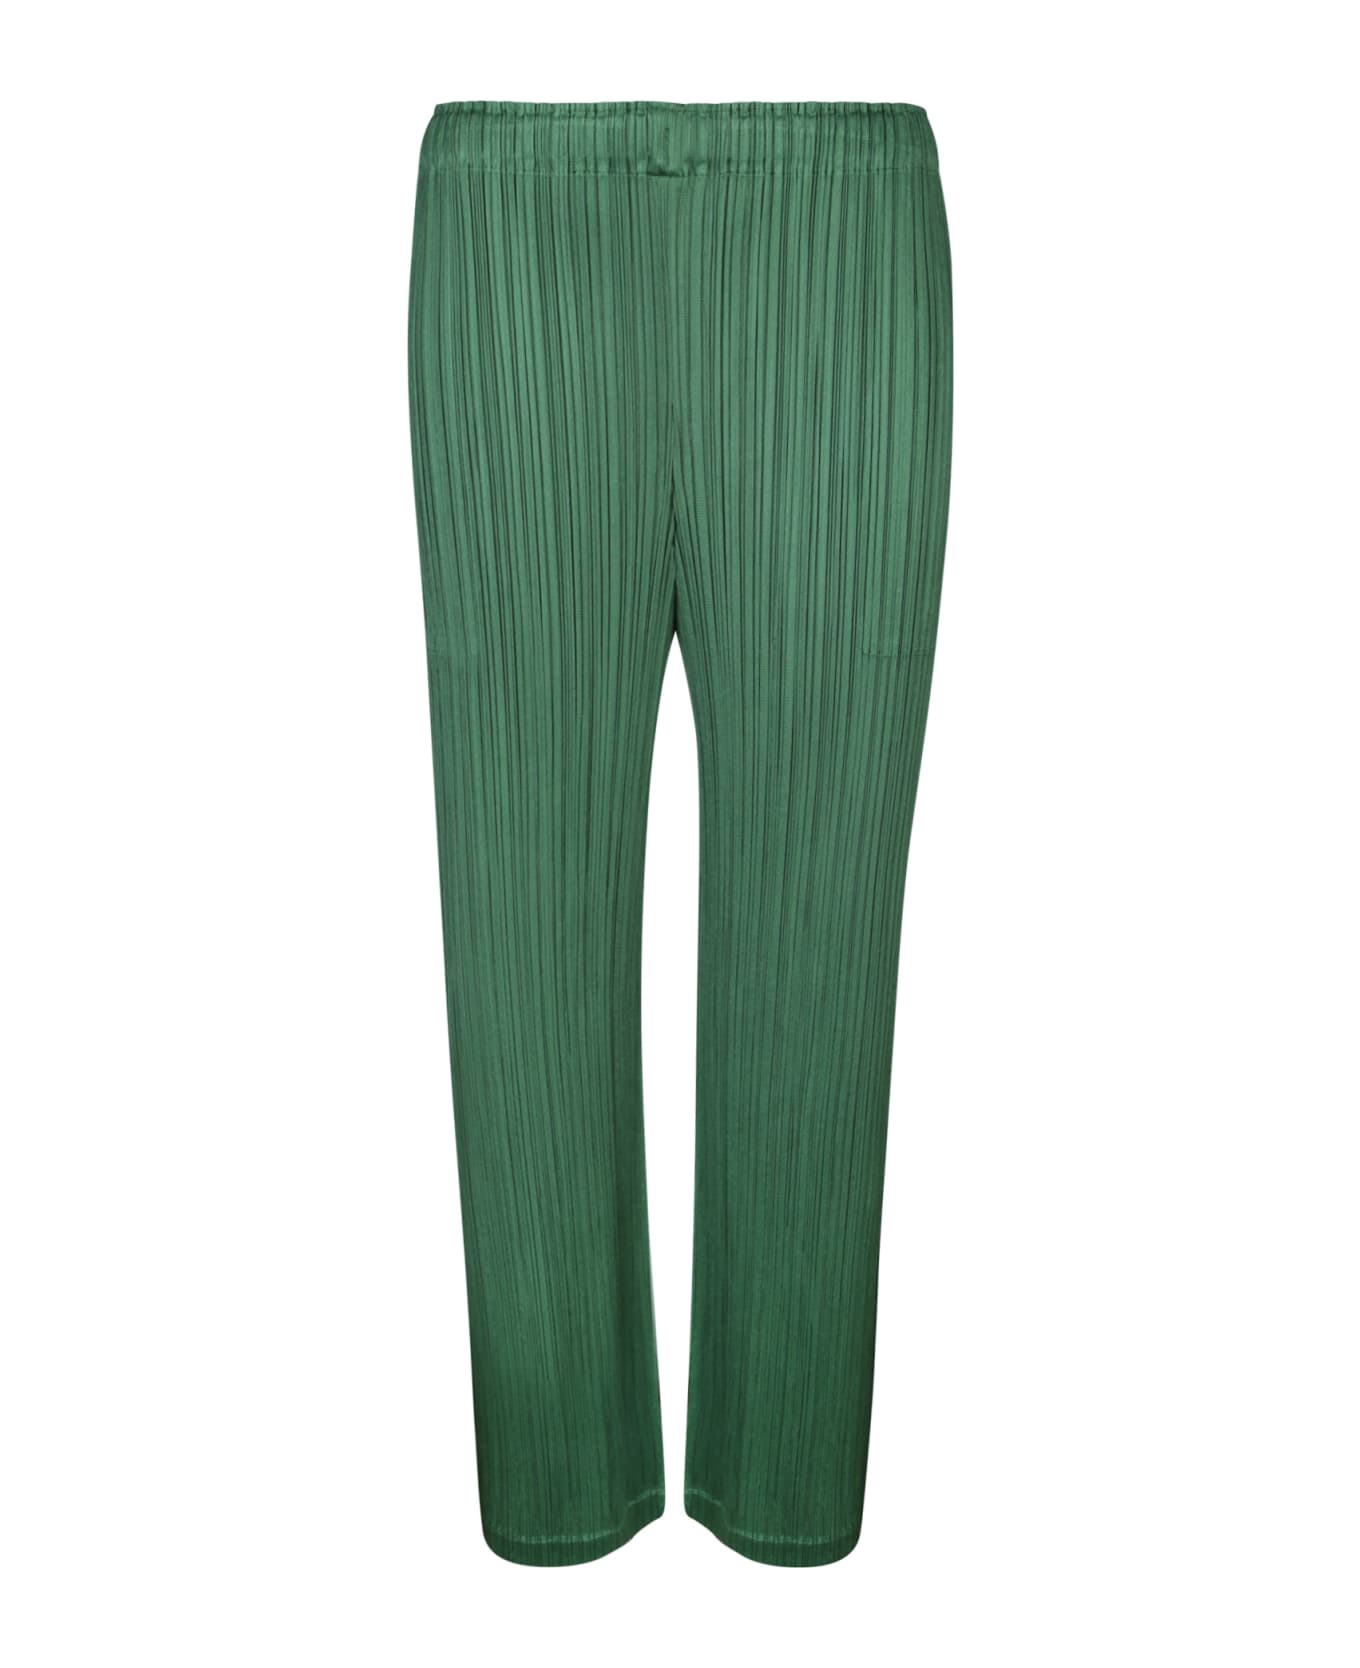 Issey Miyake Pleats Please Green Straight Trousers - Green